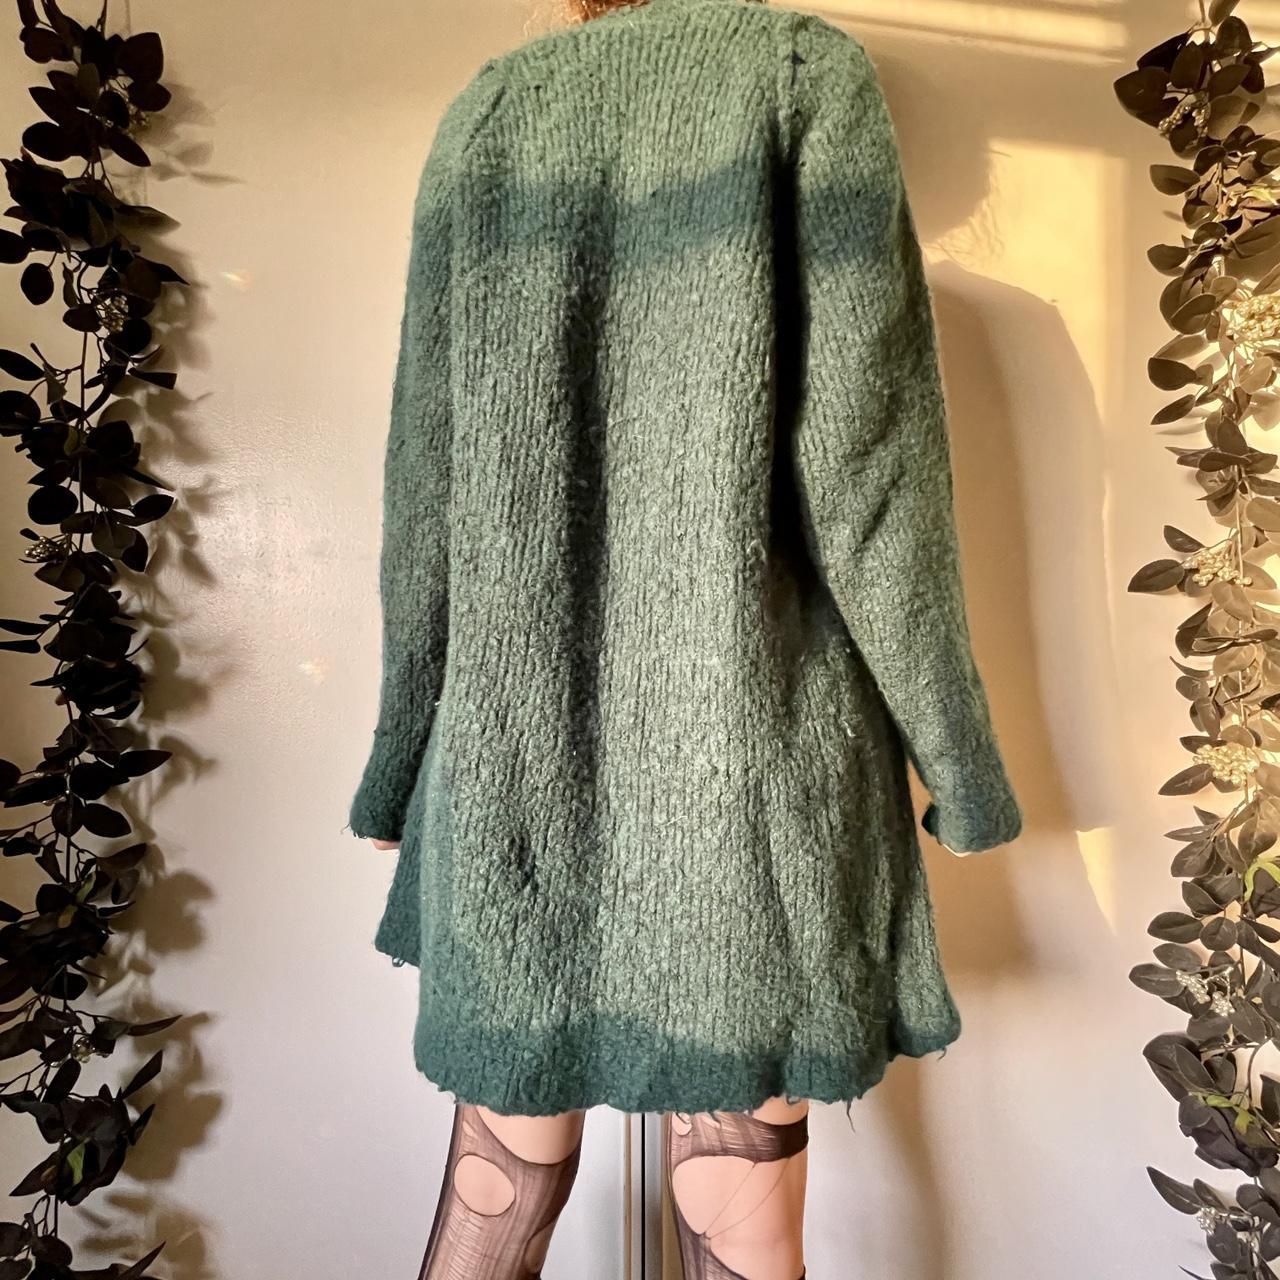 Free People Women's Green and Blue Cardigan (5)